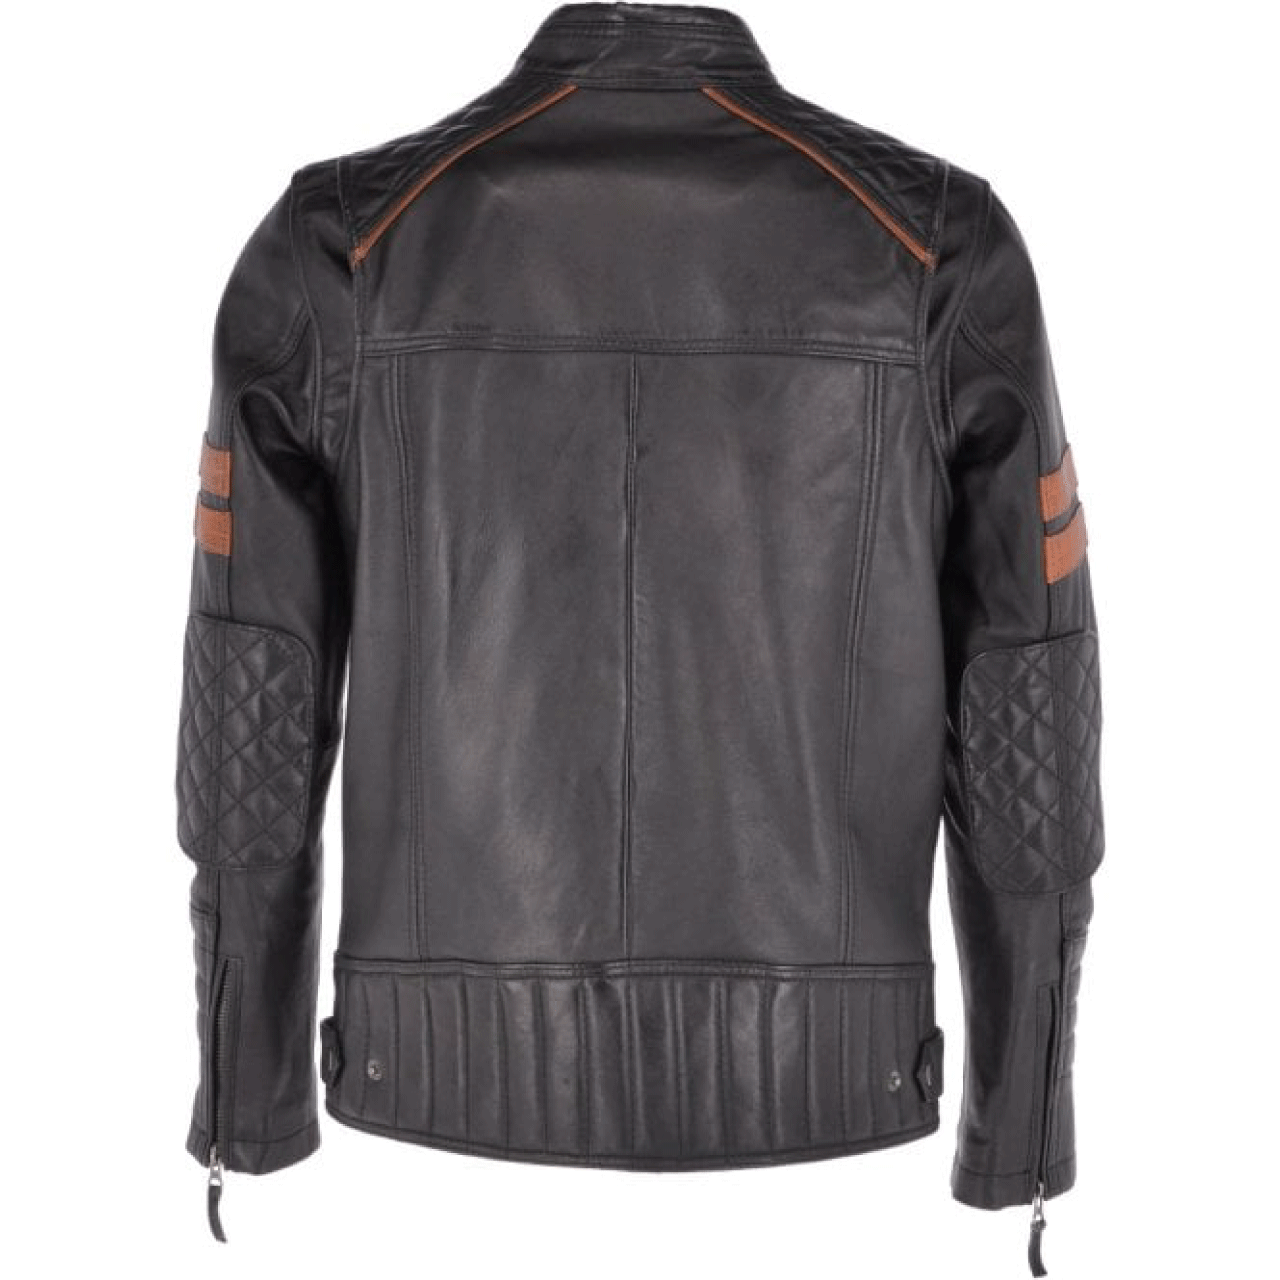 Men’s Black Leather Quilted Sheepskin Jacket with Tan Lining